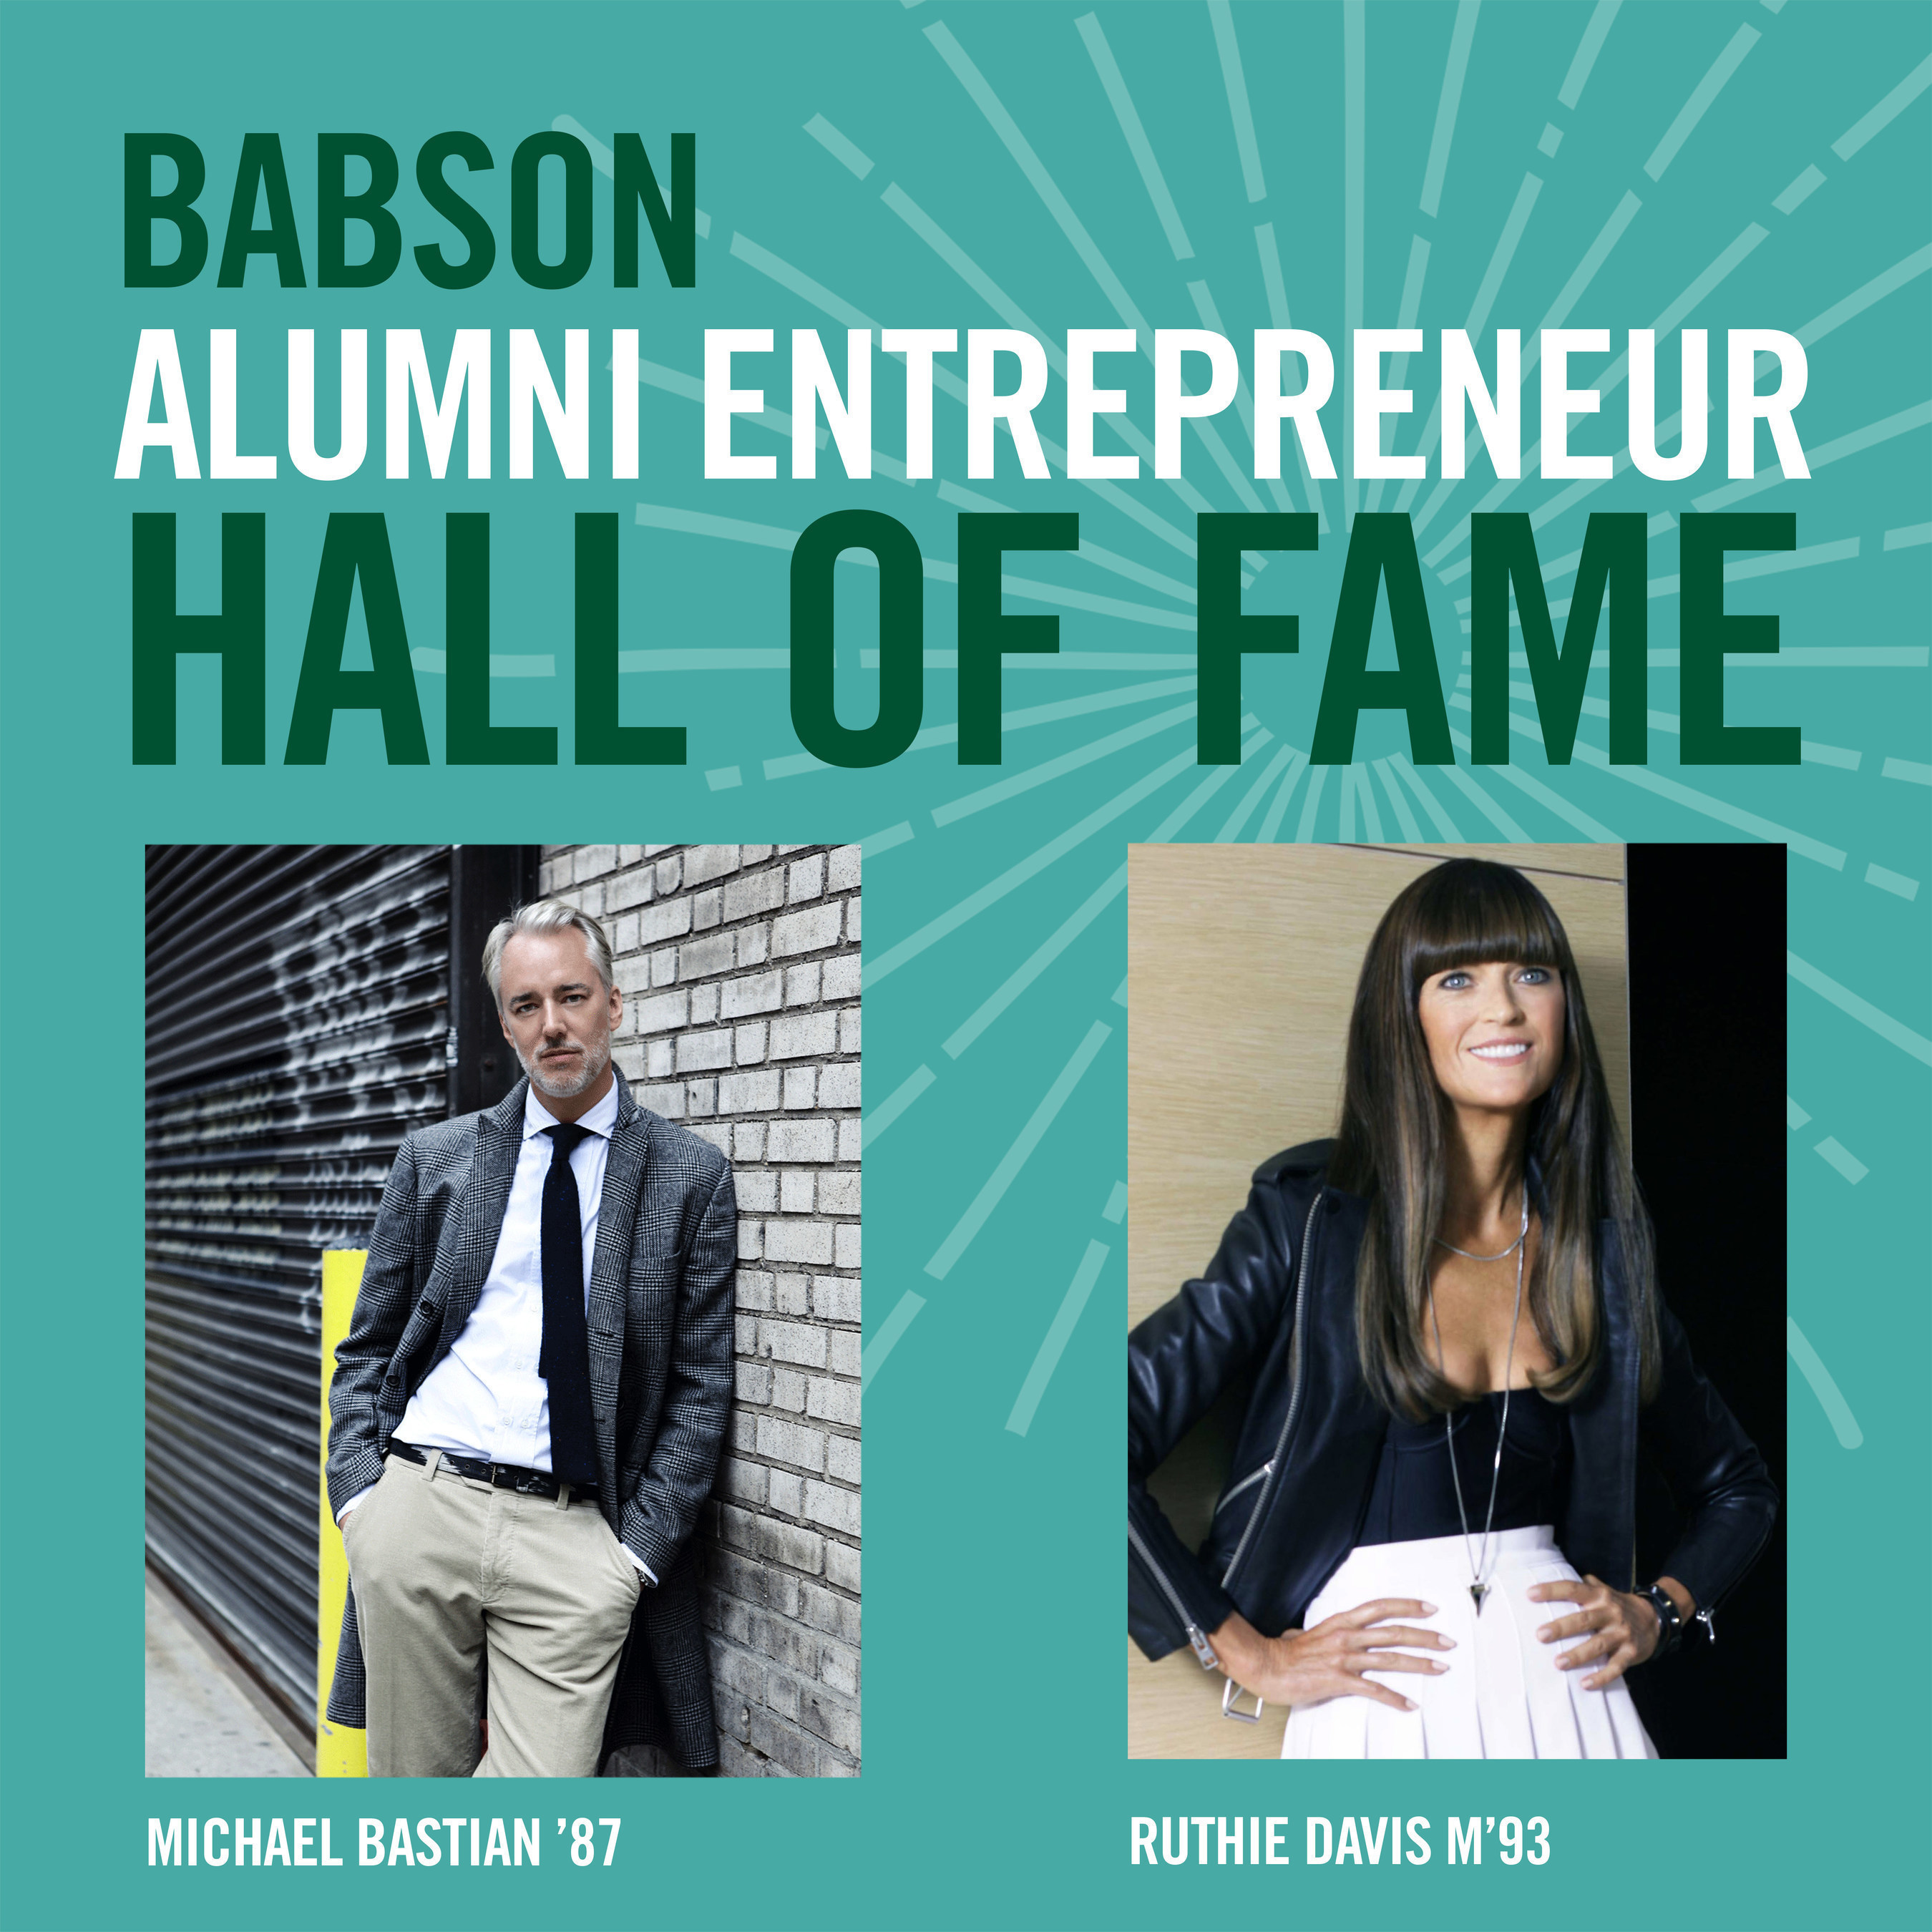 Ruthie Davis M'93, a leading independent designer and the founder of the only luxury female American shoe designer label in the industry; and Michael Bastian '87, an American fashion designer known for his namesake label,Michael Bastian, and his work for brands such as GANT, will be inducted into The Babson College Alumni Entrepreneur Hall of Fame during ceremonies on the Wellesley campus on April 16, 2015.